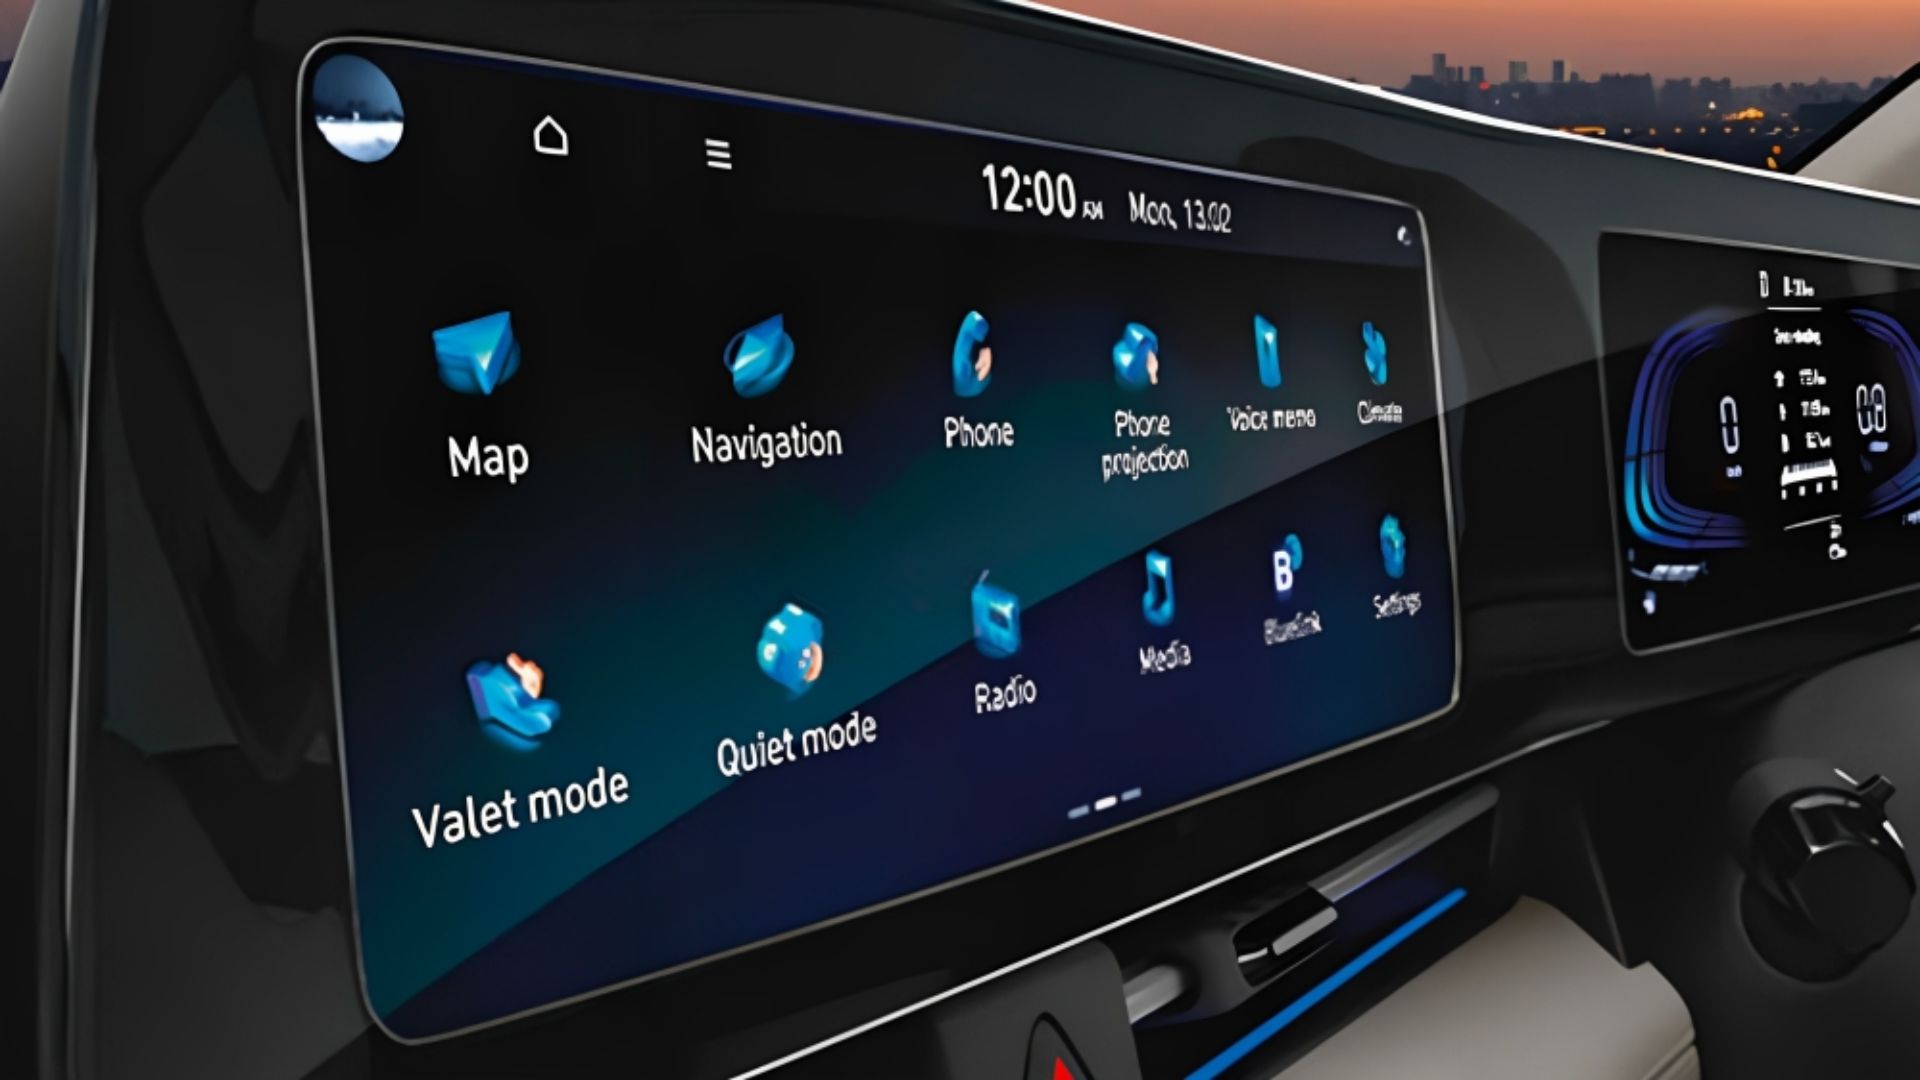 More teasers of the next-gen Hyundai Accent touchscreen